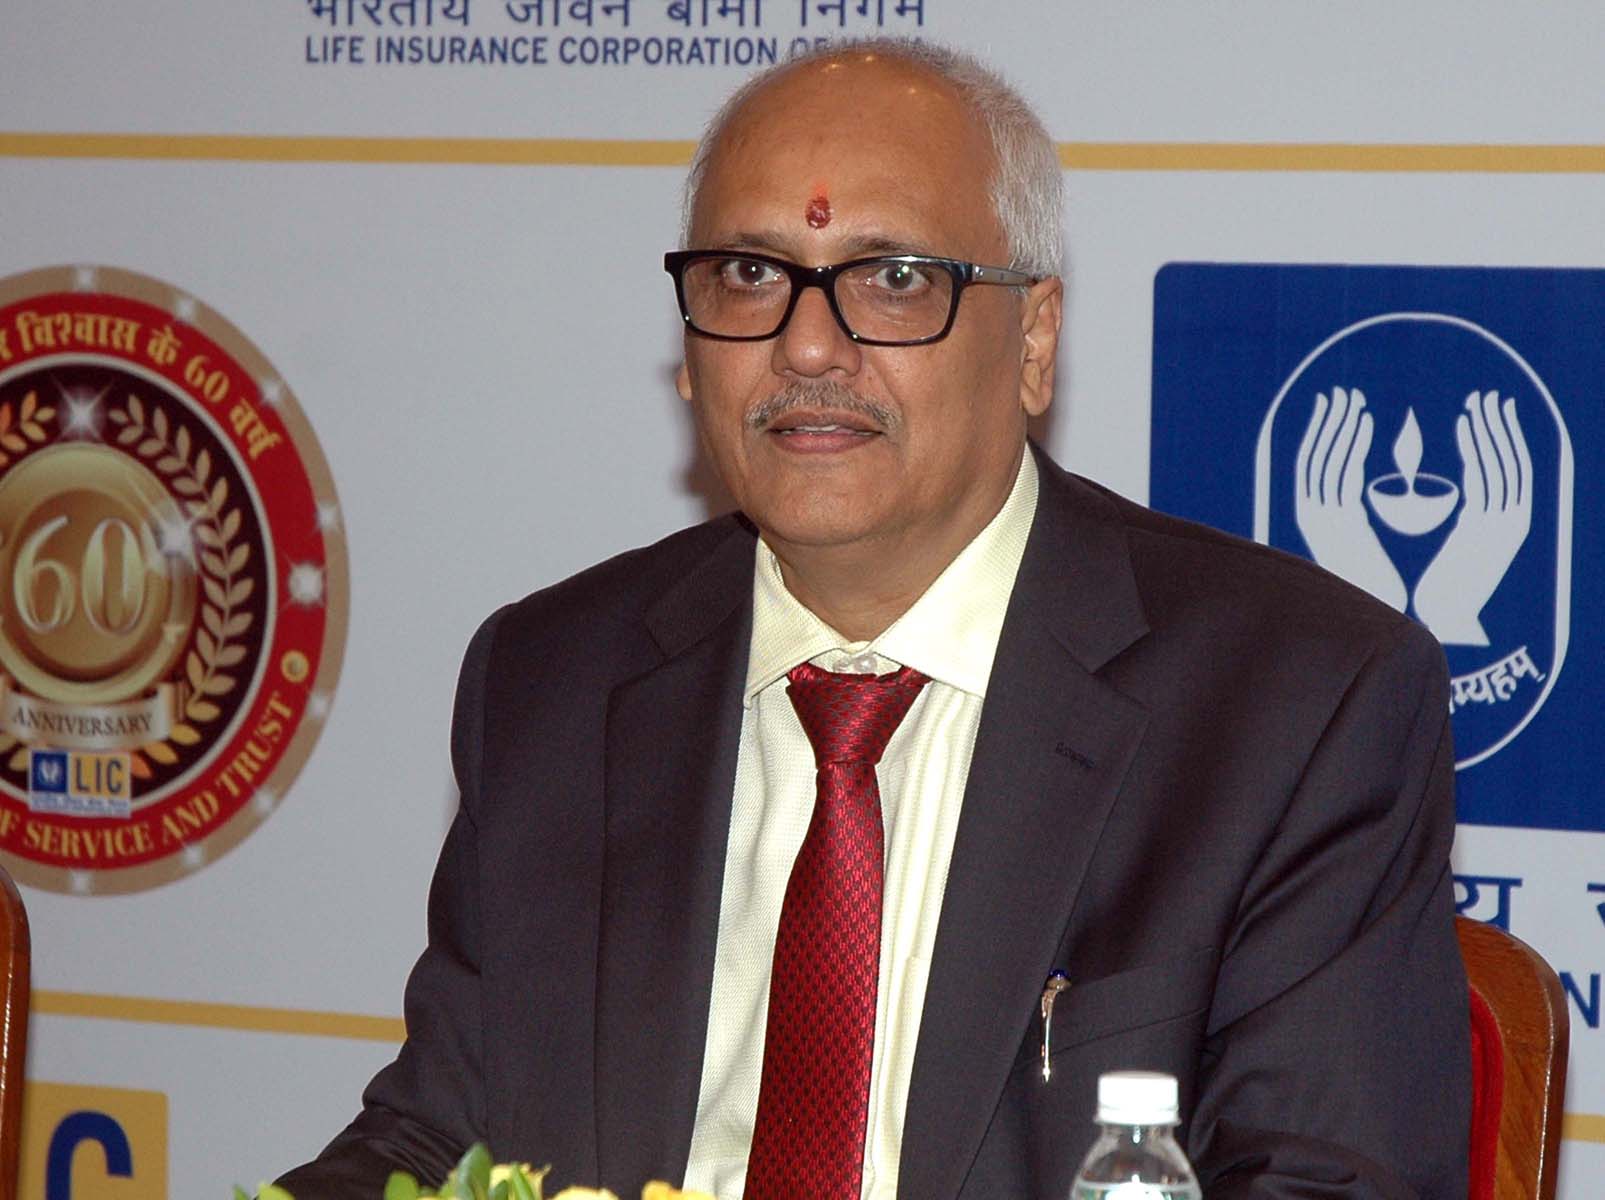 LIC chairman says all options open to revive IL&FS